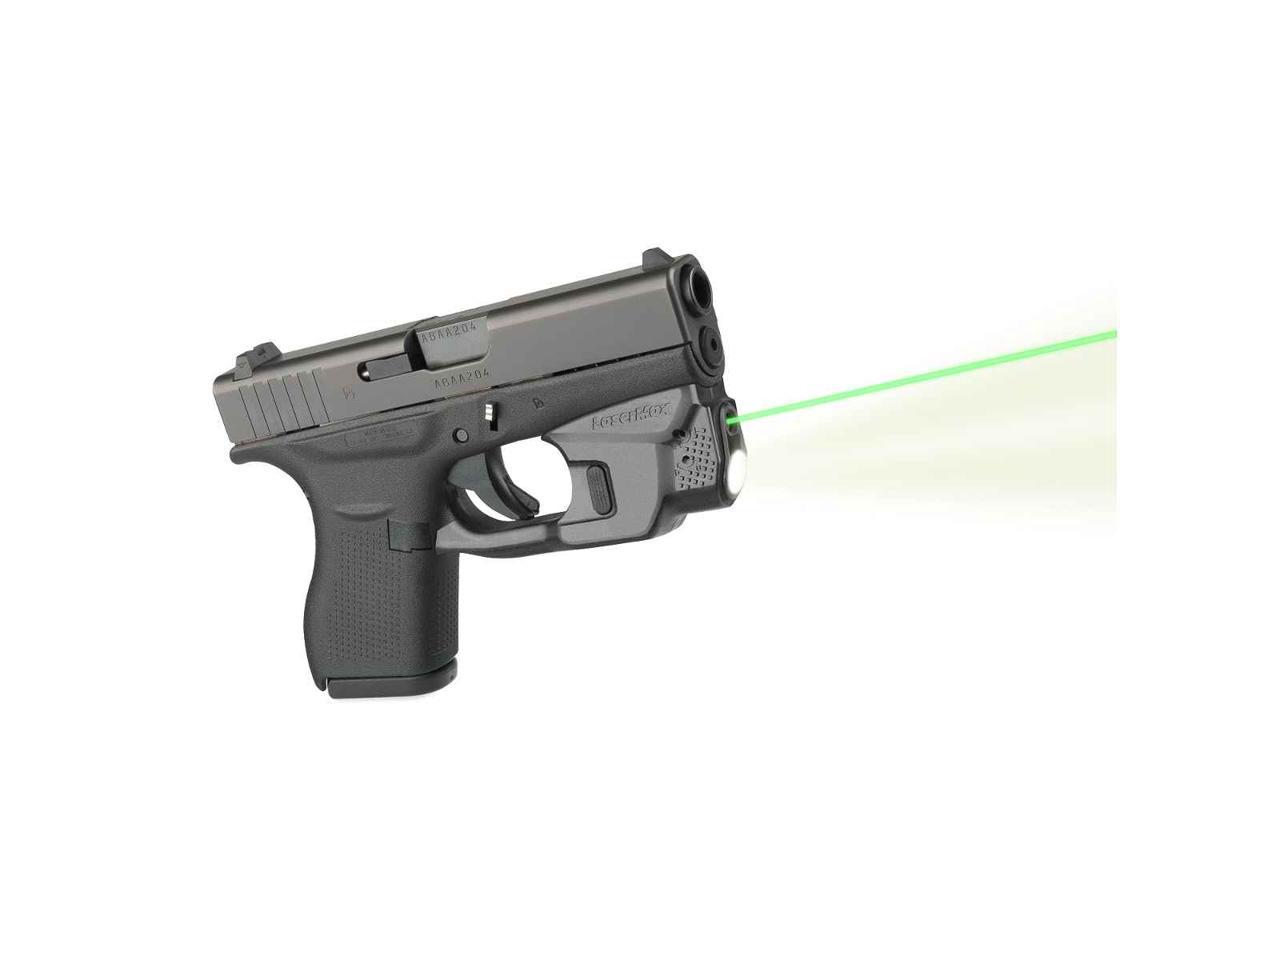 LASERMAX CF-G4243-C-R GRIPSENSE LIGHT AND RED LASER FOR GLOCK 42 & 43 